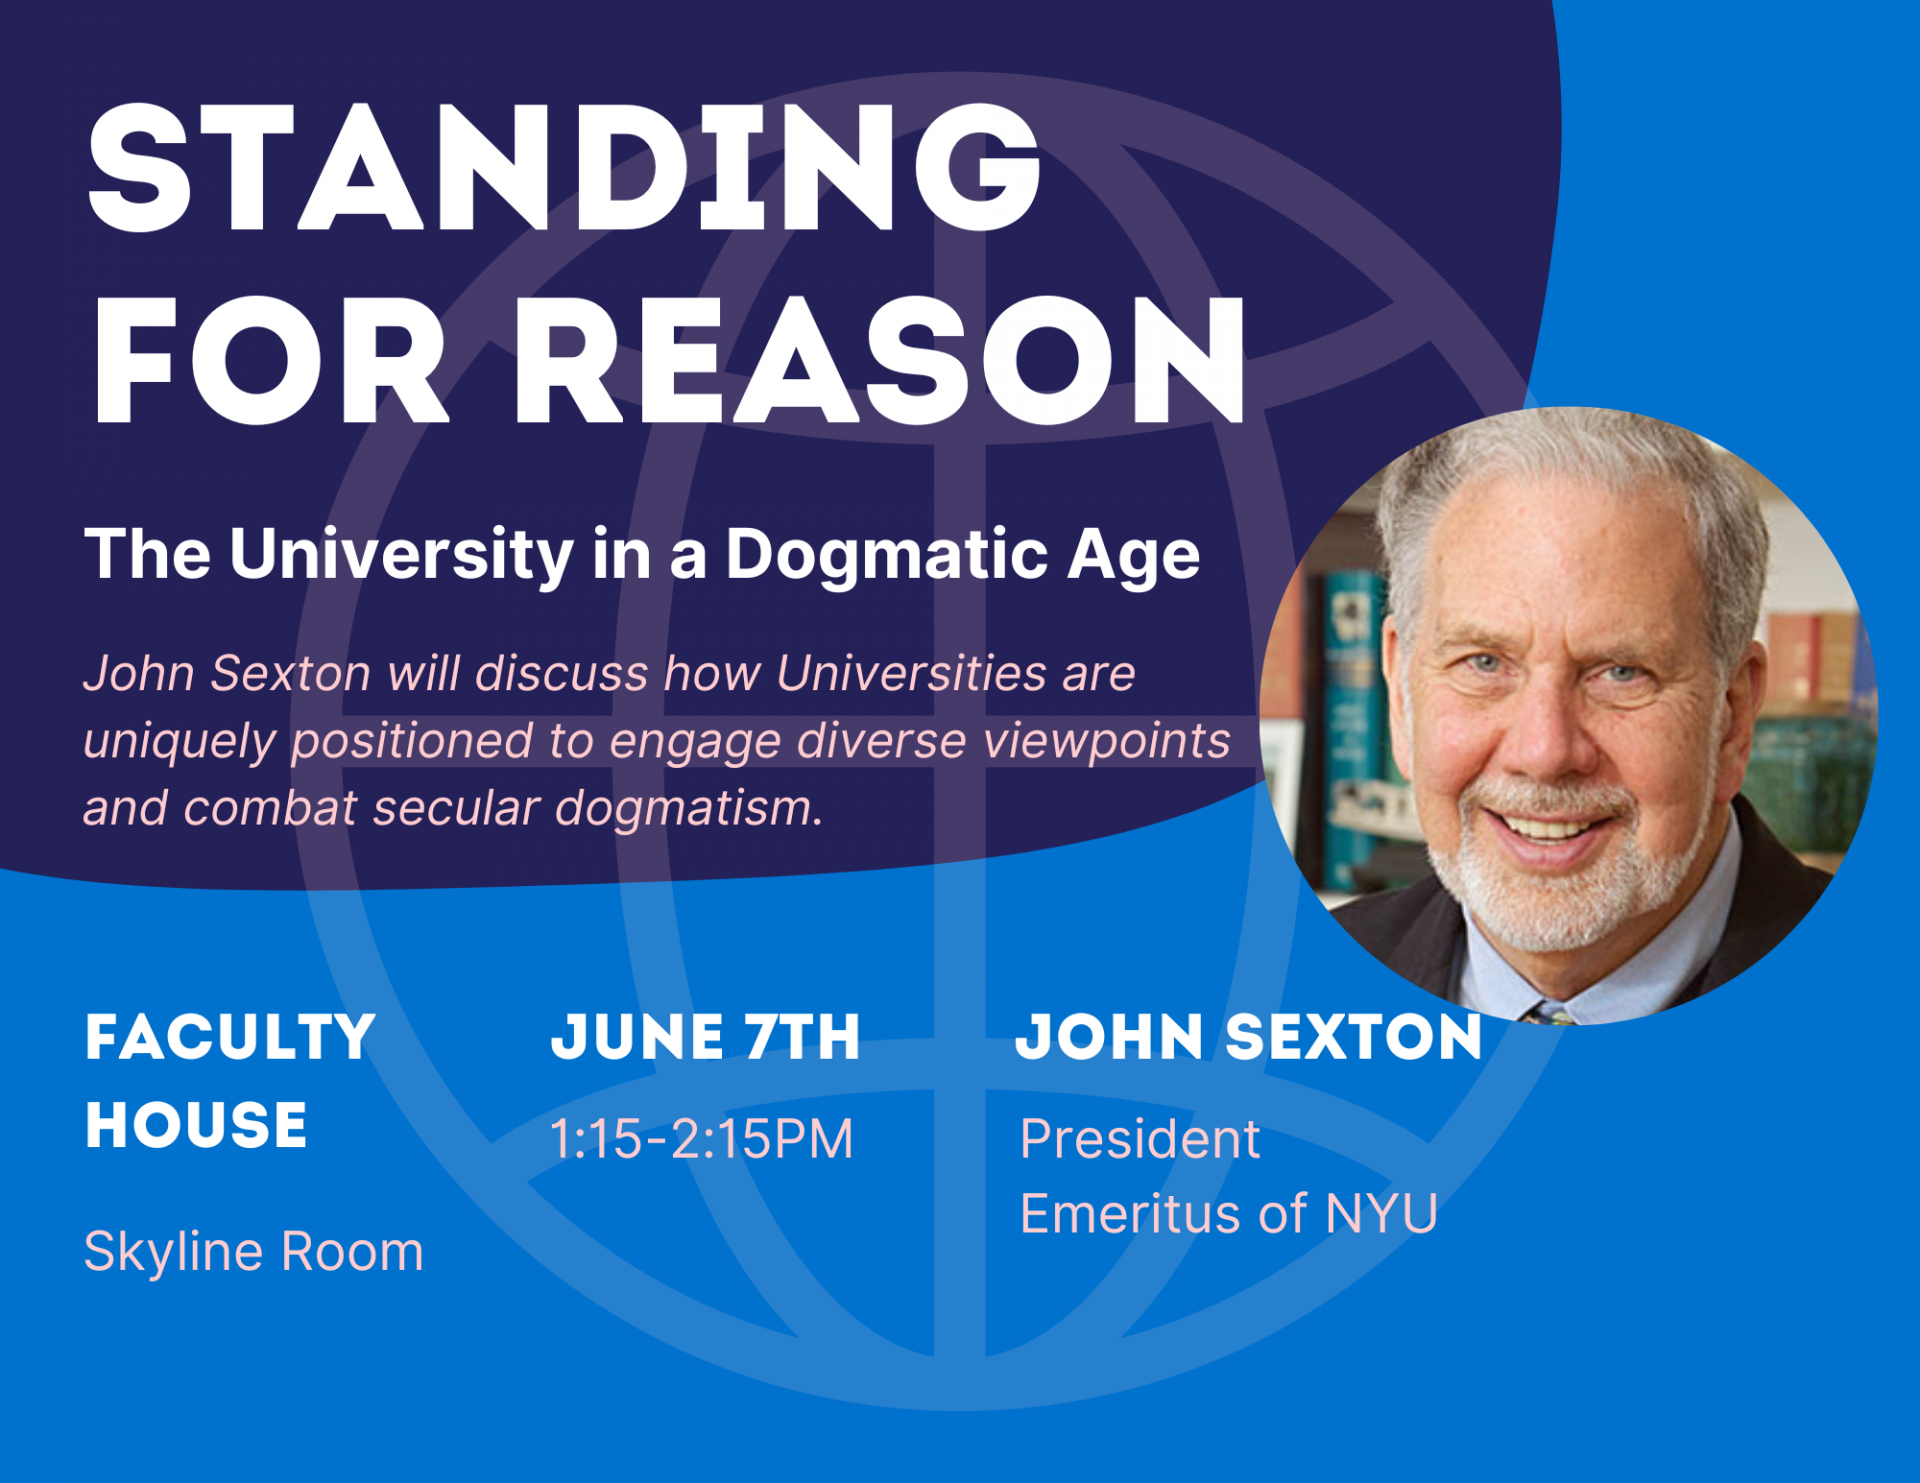 Standing for Reason event flyer with photo of John Sexton